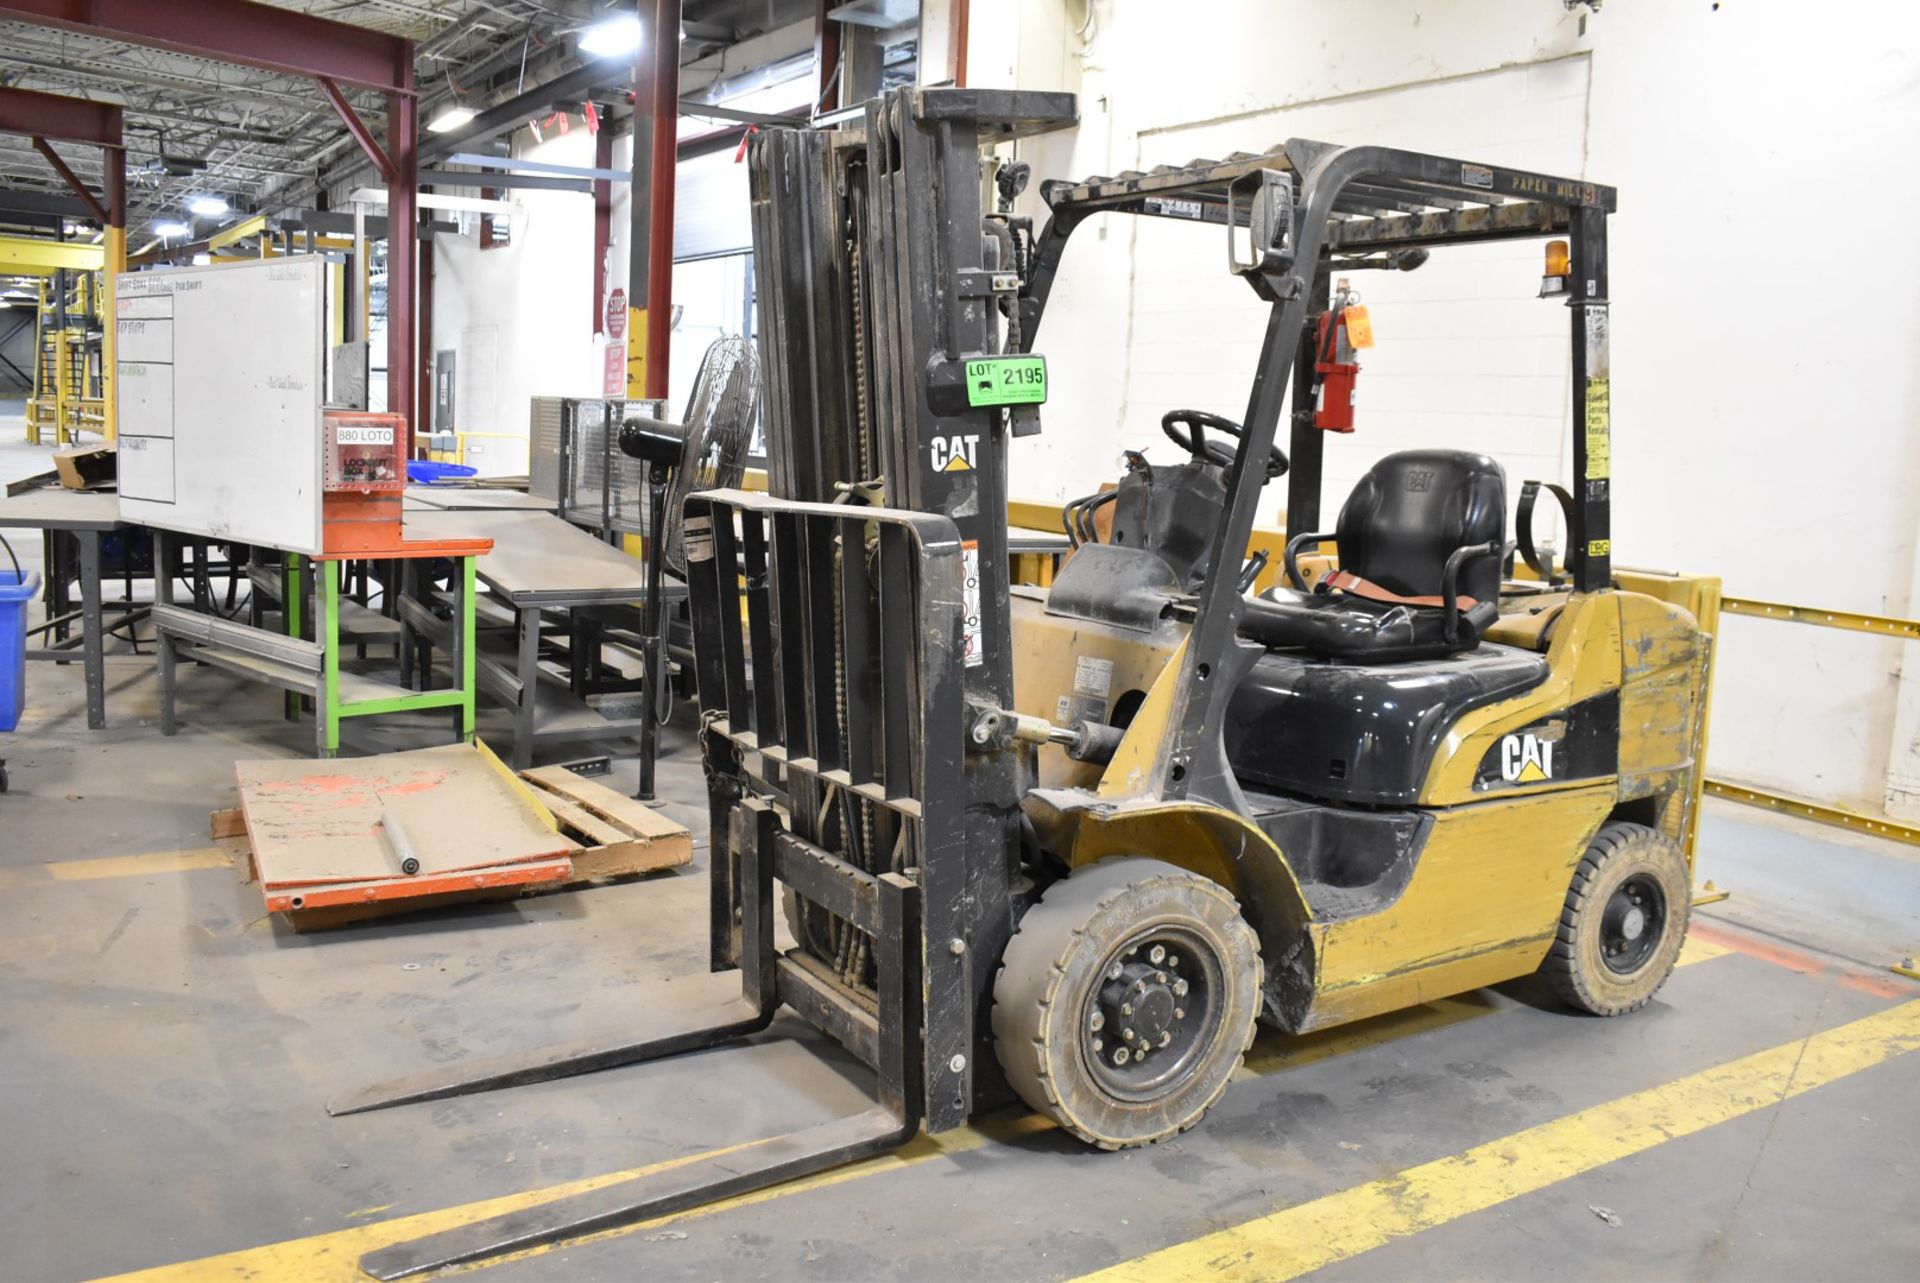 CATERPILLAR P5000 4,600 LBS. CAPACITY LPG FORKLIFT WITH 170" MAX VERTICAL REACH, 3-STAGE HIGH - Image 2 of 9